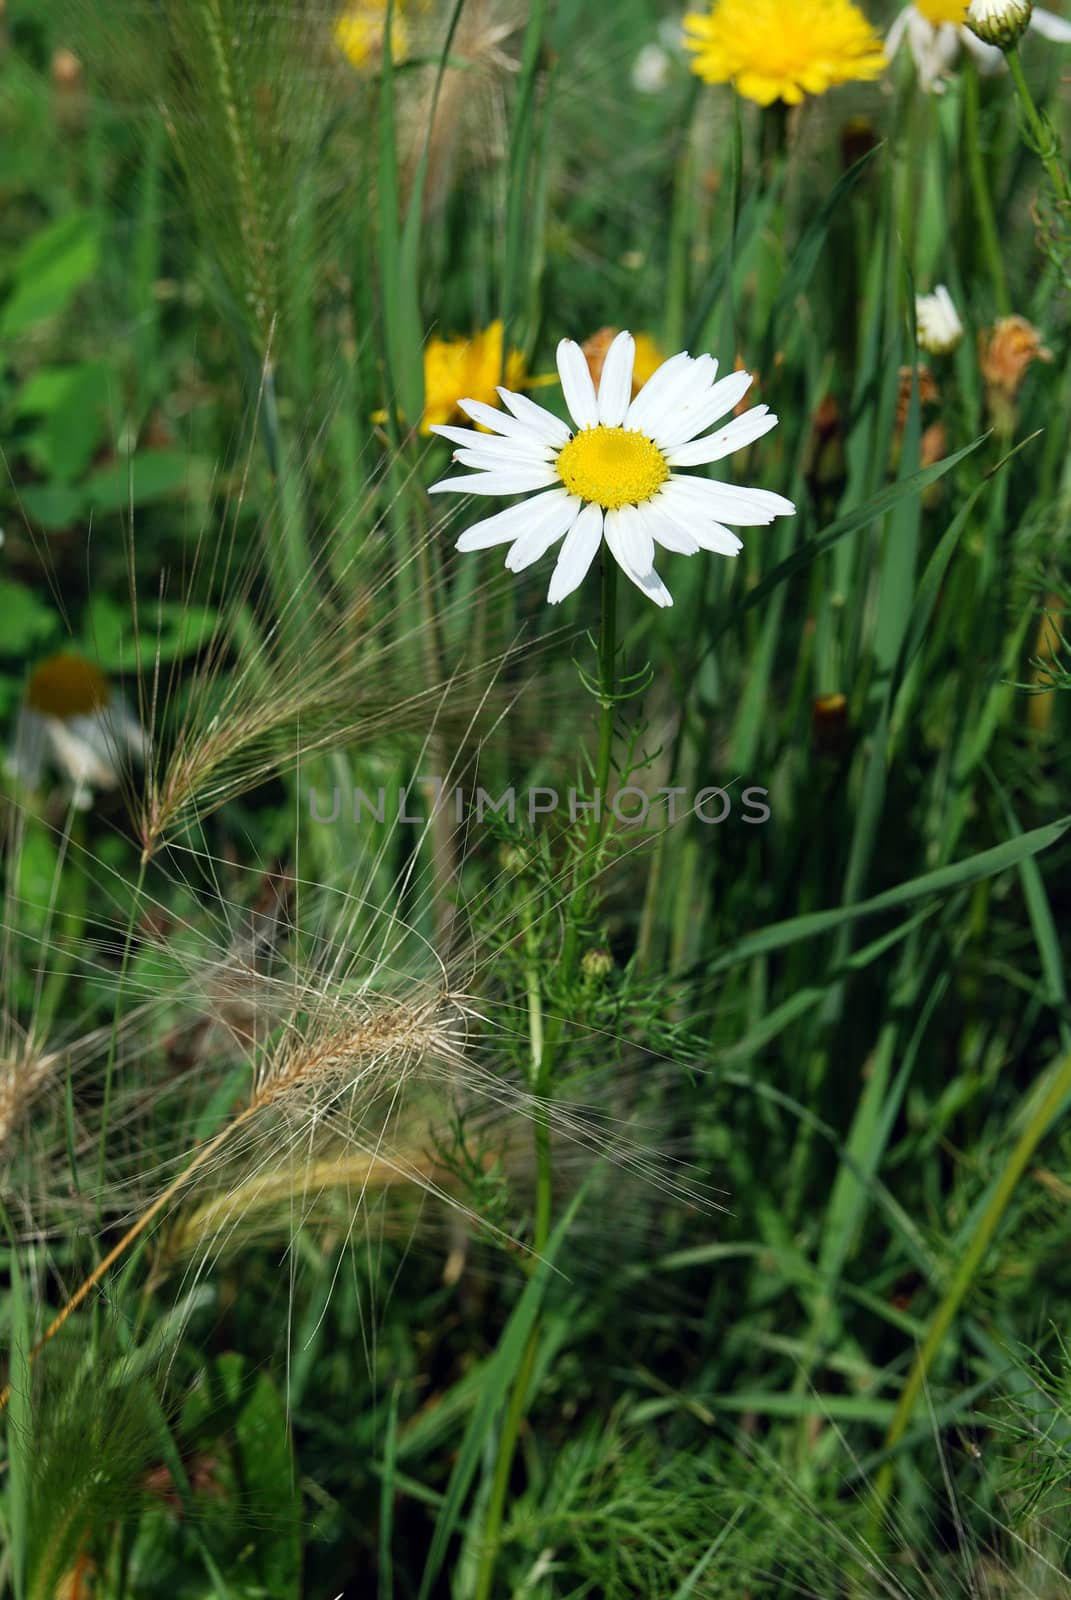 daisy and foxtail barley  in green grass